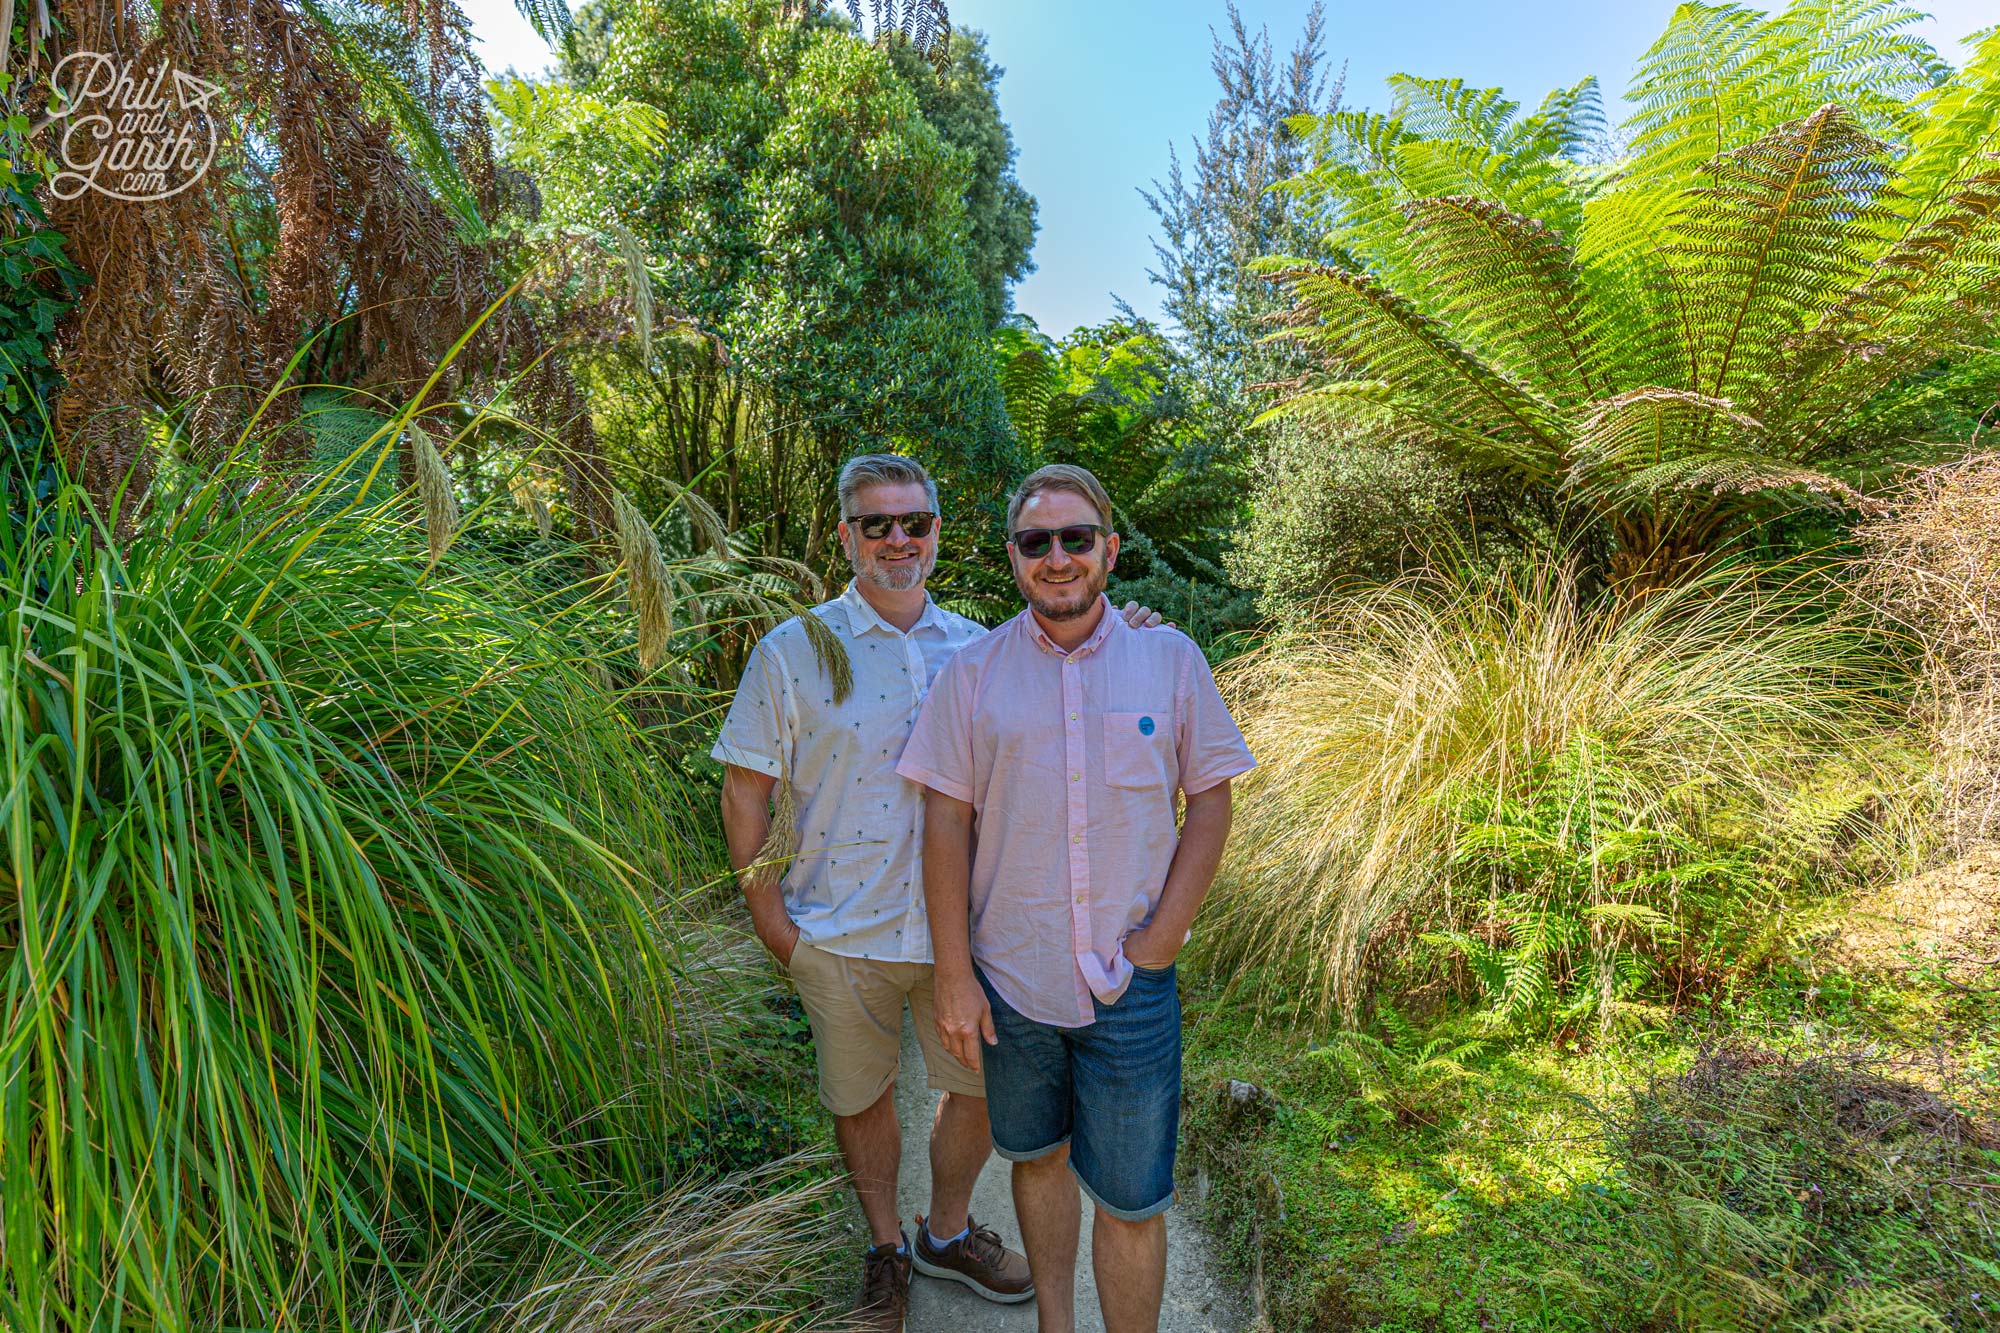 Phil and Garth in the New Zealand garden